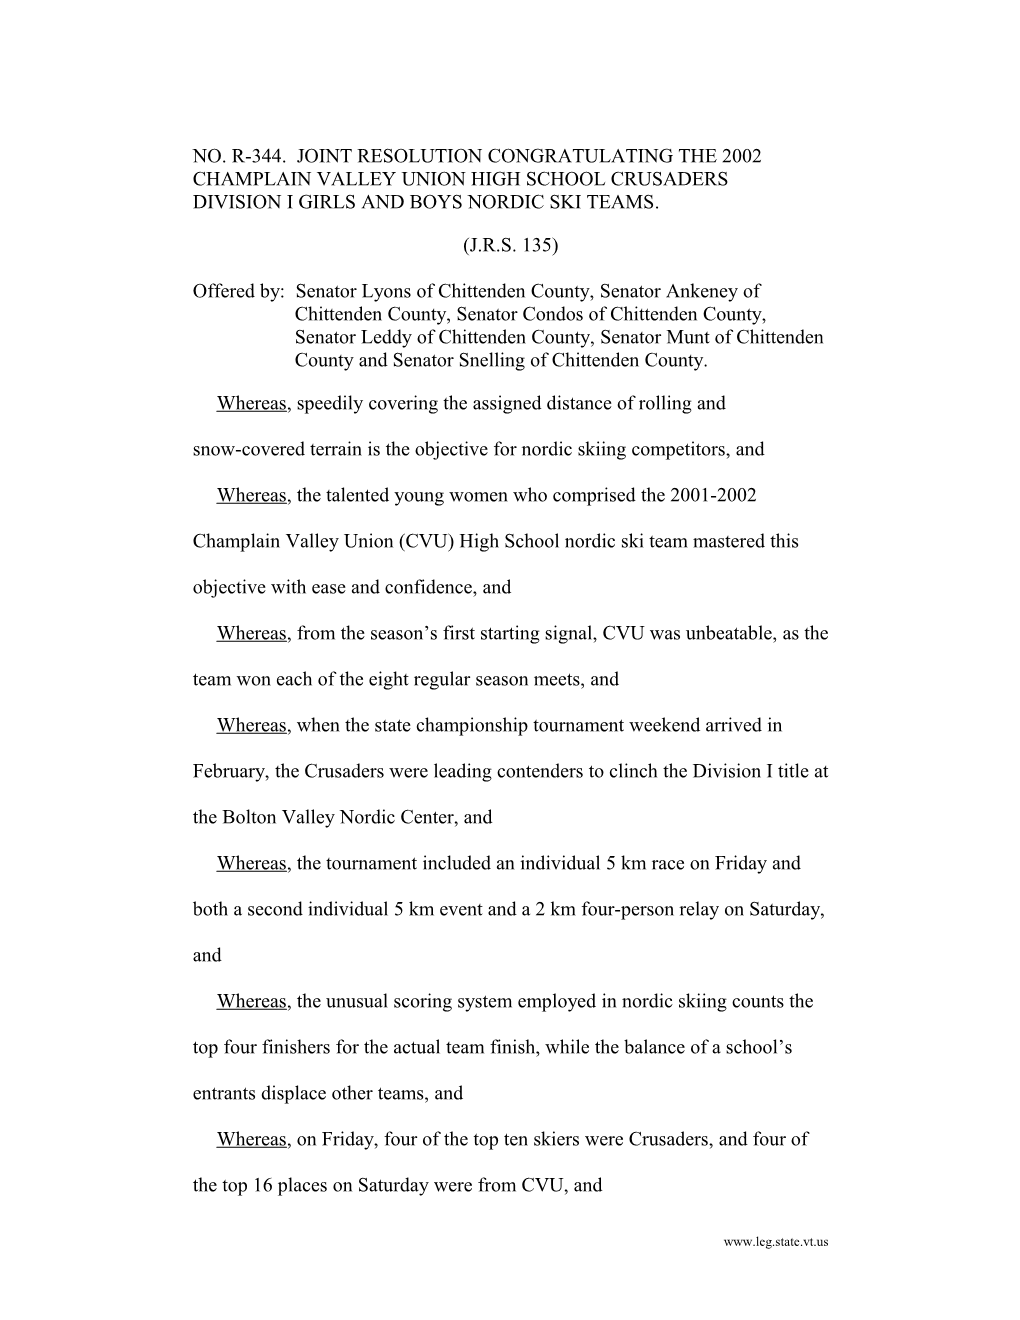 NO. R-344. JOINT RESOLUTION Congratulating the 2002 Champlain Valley Union High School